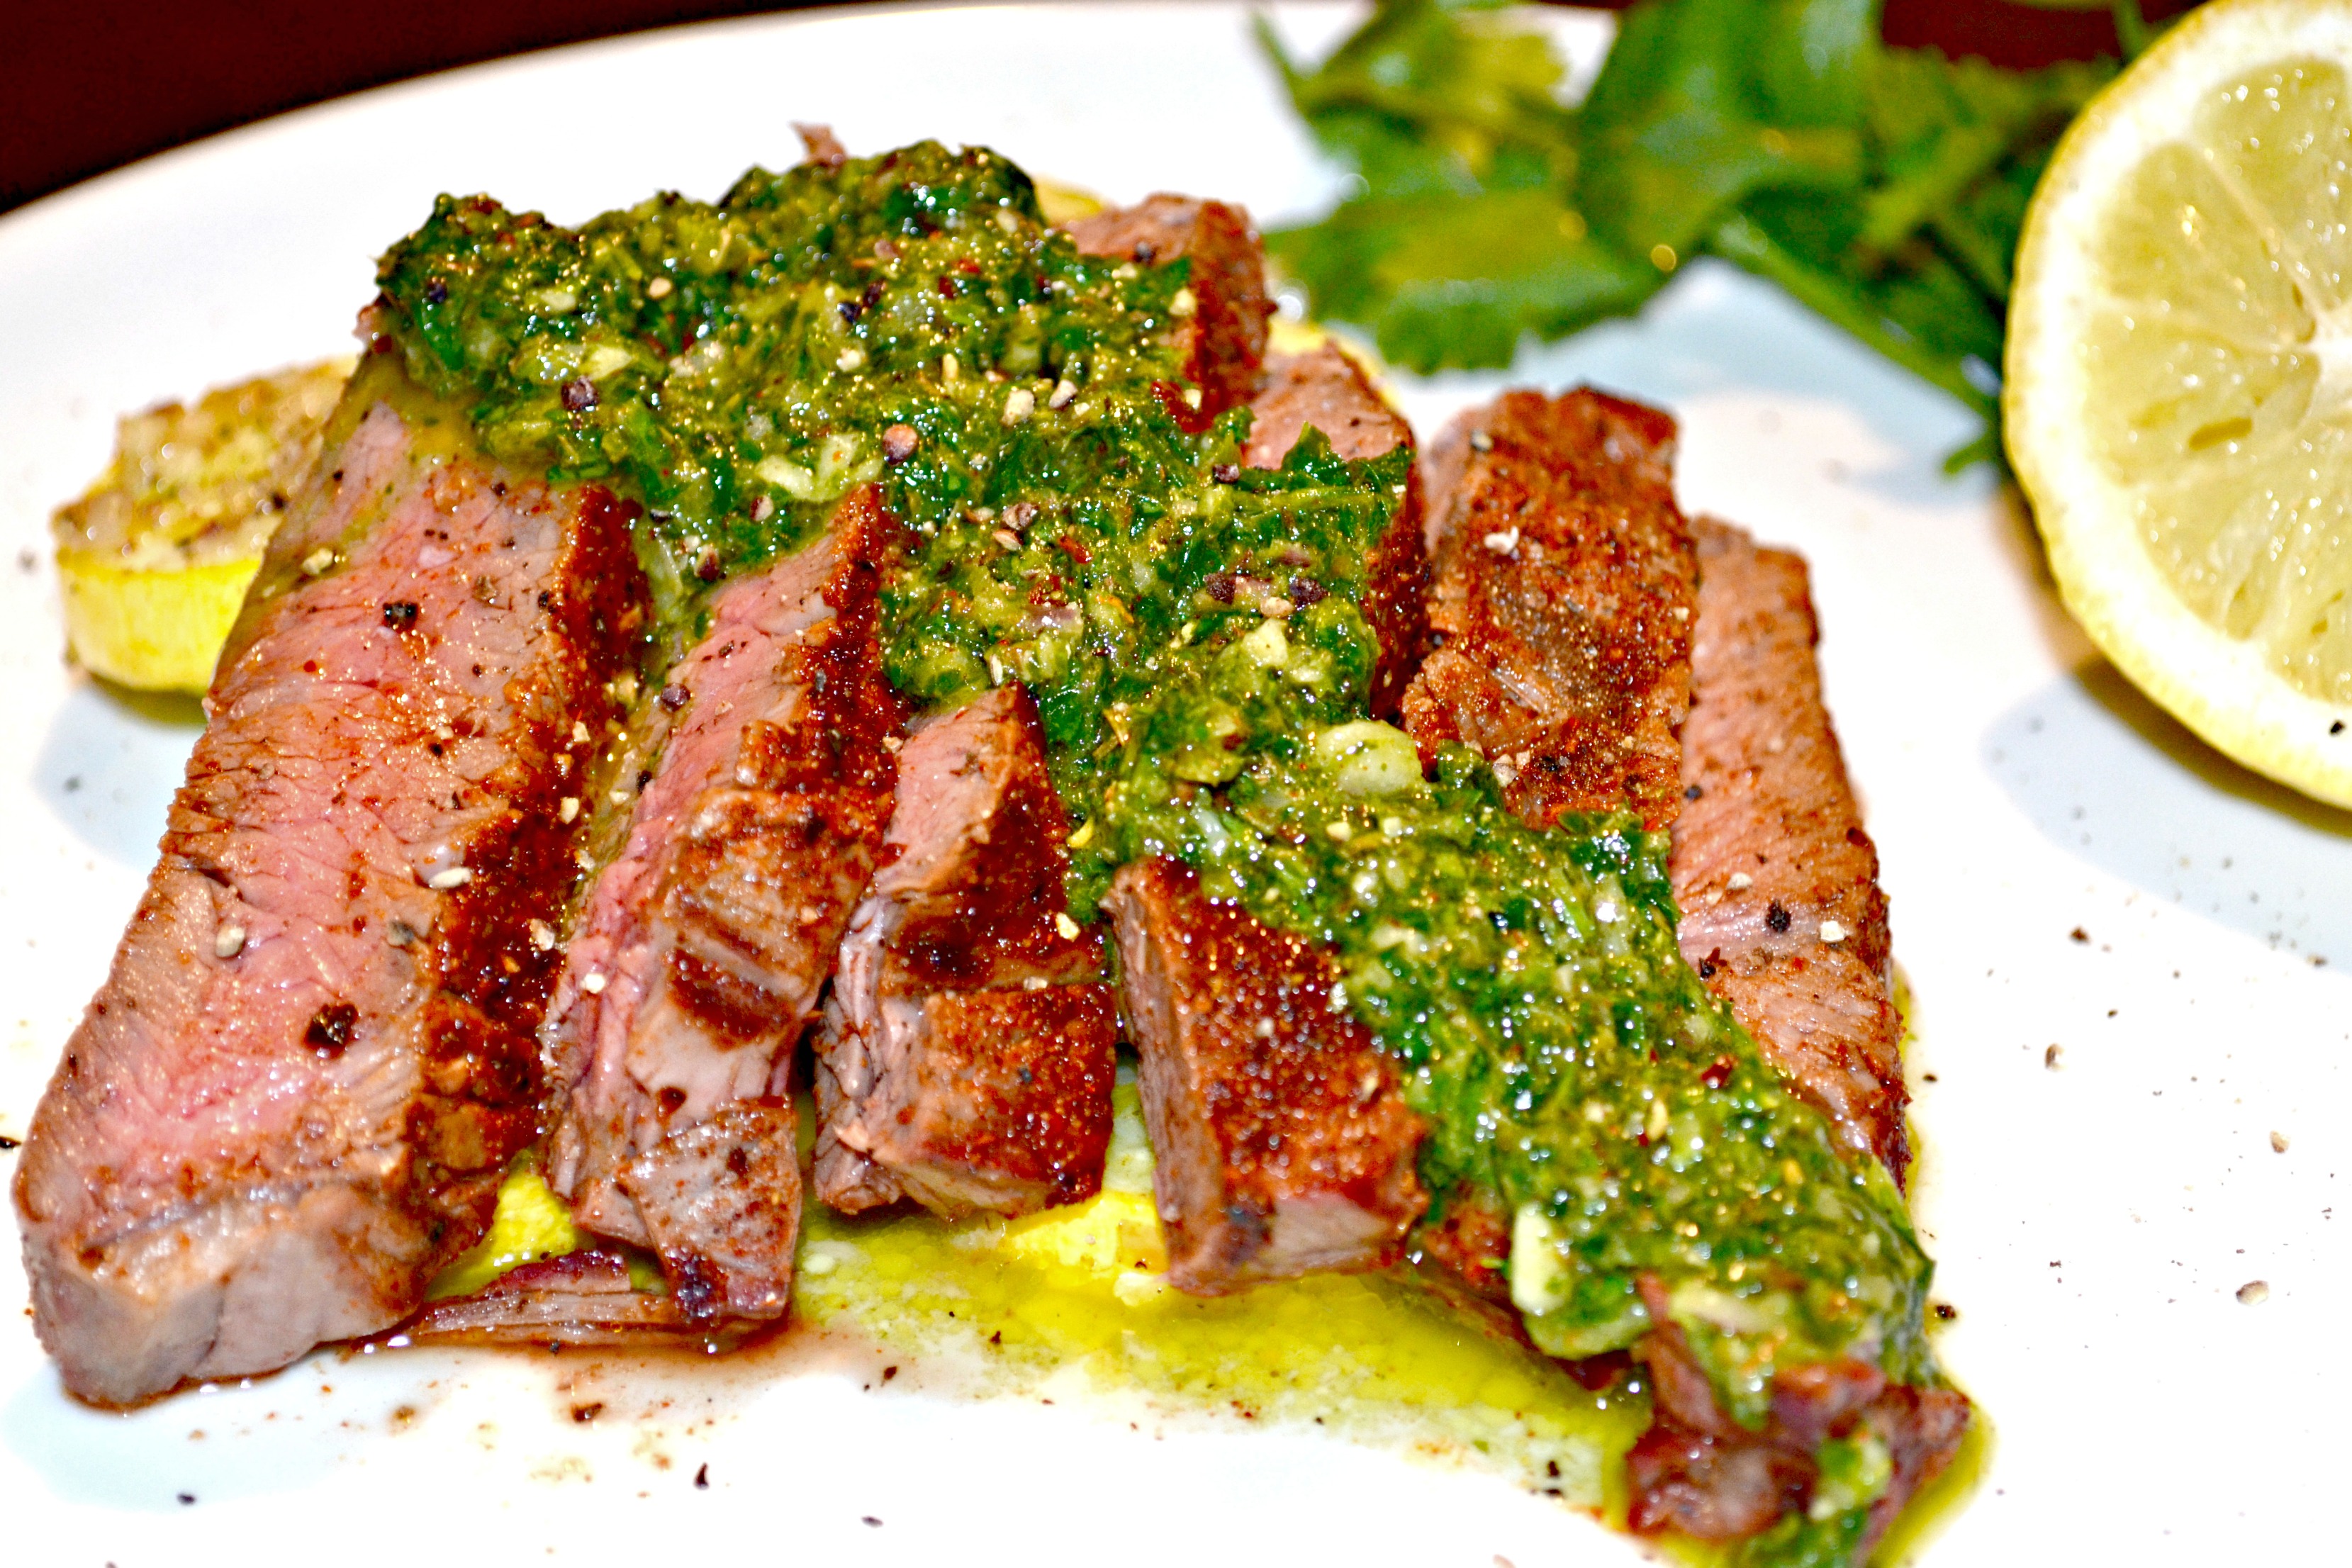 Spice-Rubbed Steak with Chimichurri Sauce